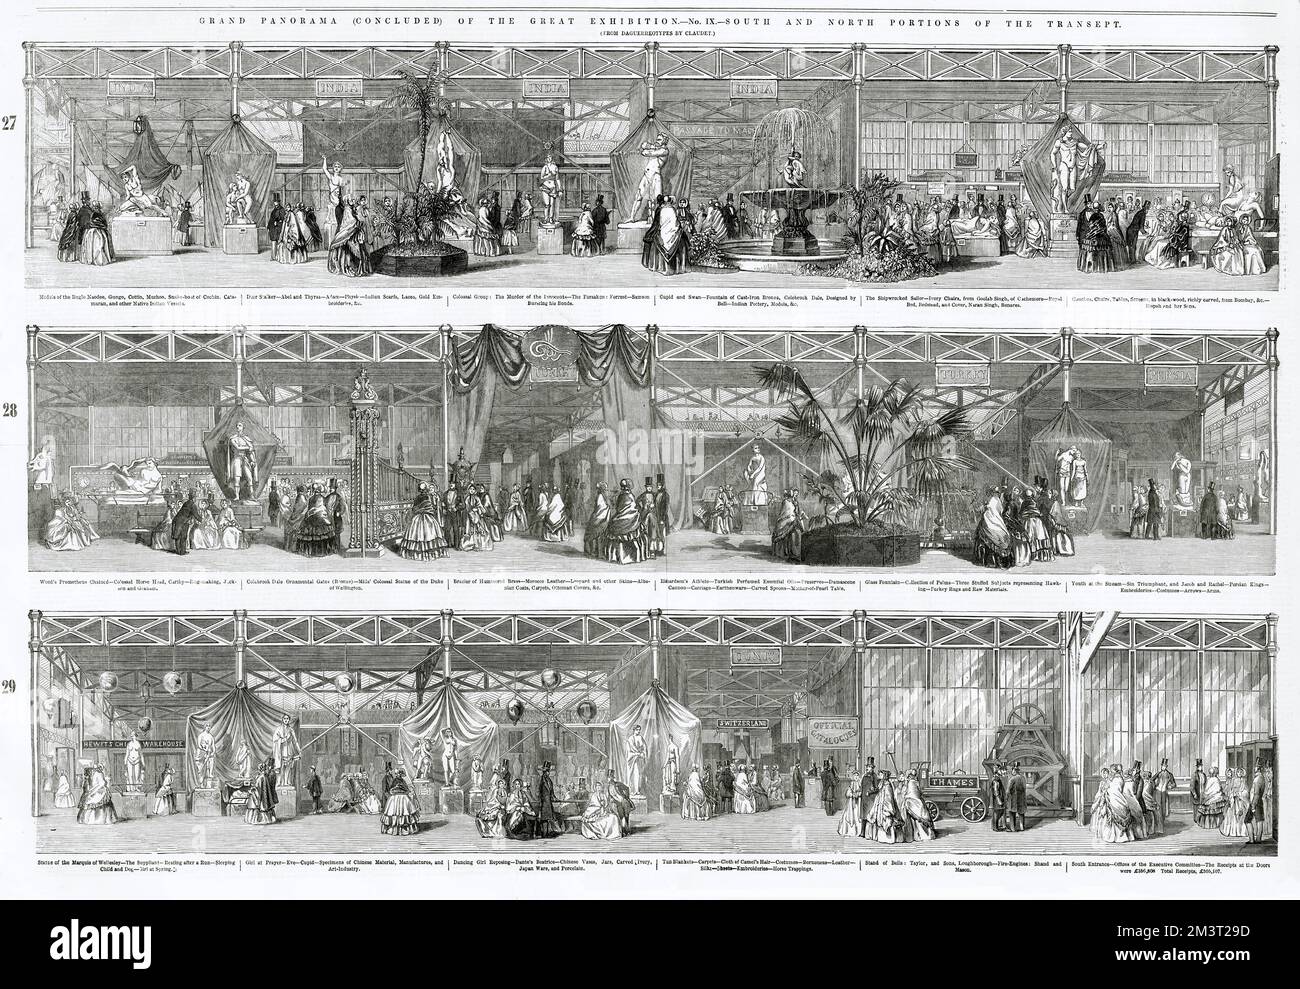 Grand Panorama of the Great Exhibition showing the south and north transept. Stock Photo